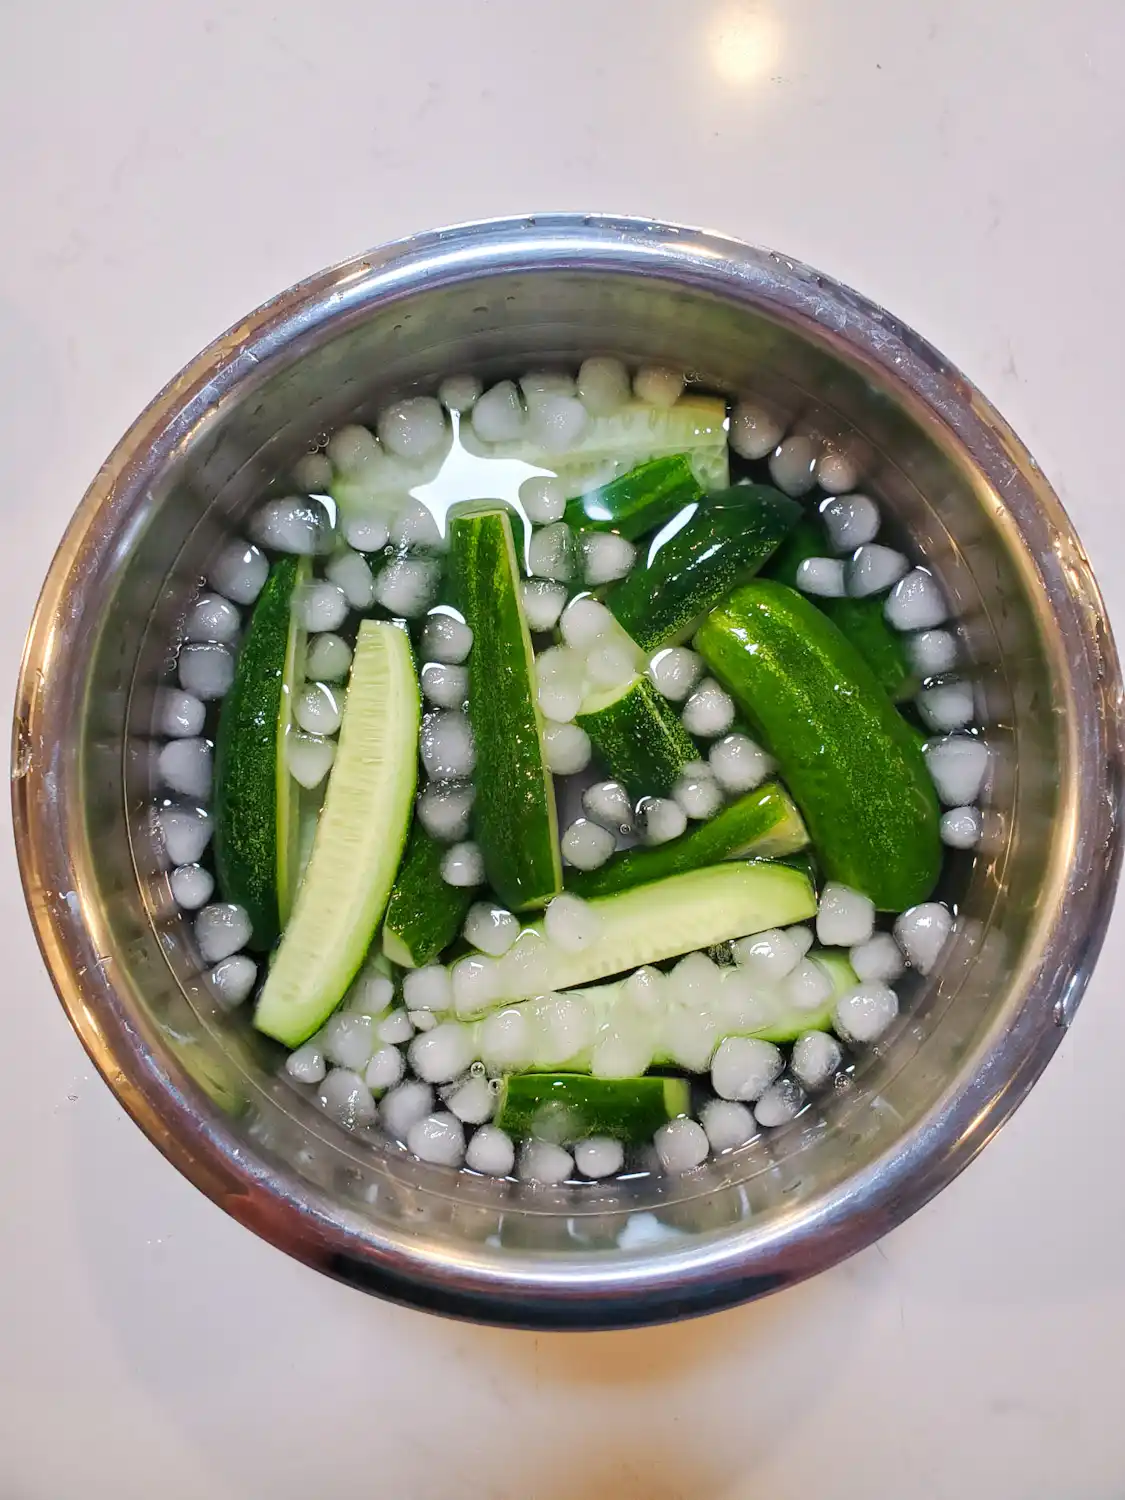 A metal bowl is full of ice cubes floating in water along with halves and quarters of cucumbers floating in the icy water. 